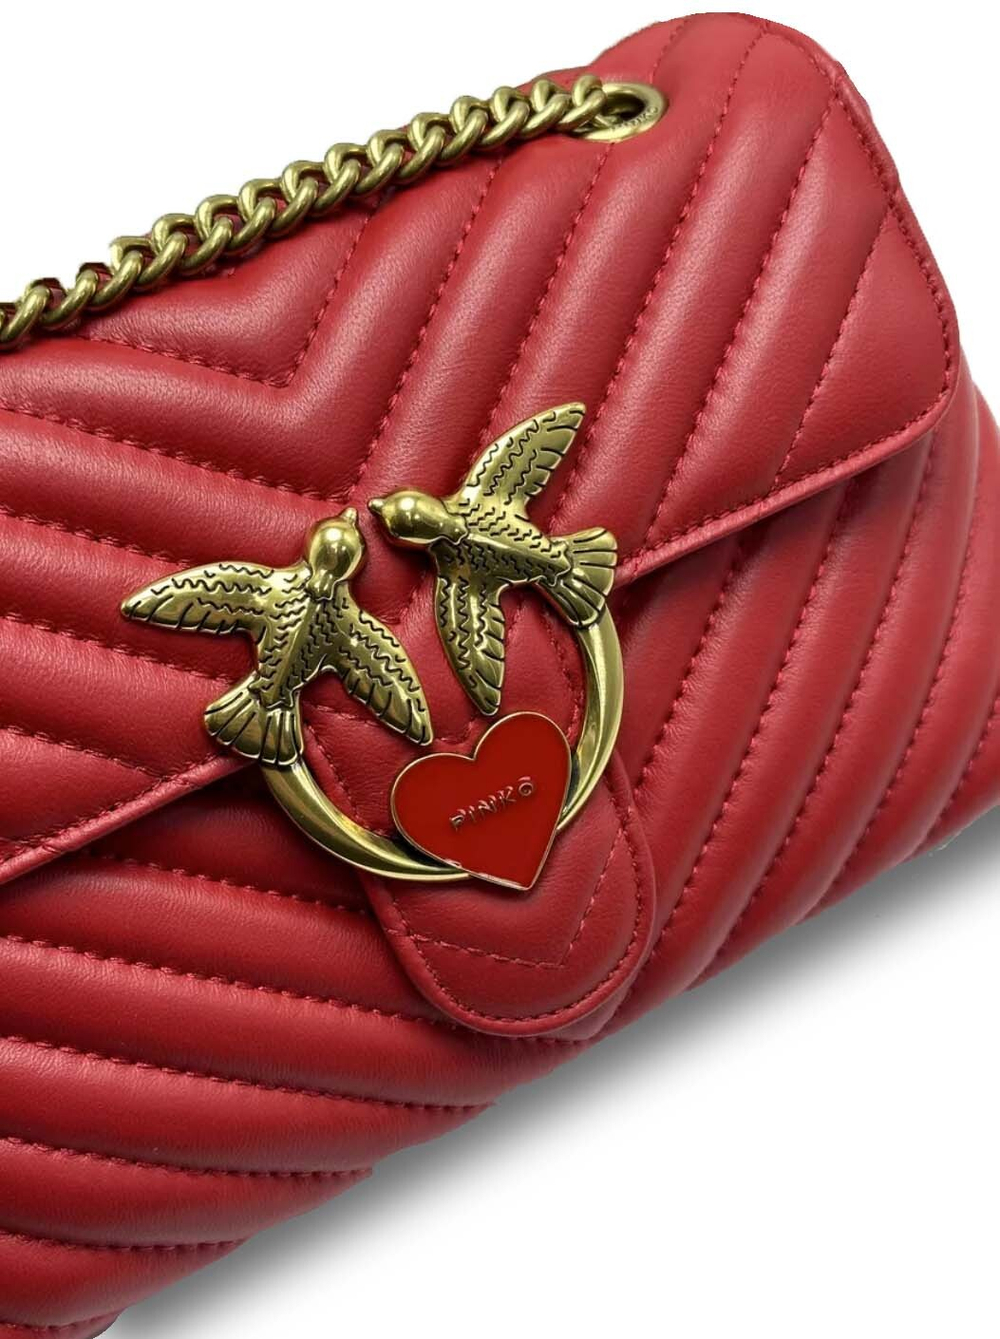 LADY LOVE BAG PUFF HEART - red gold